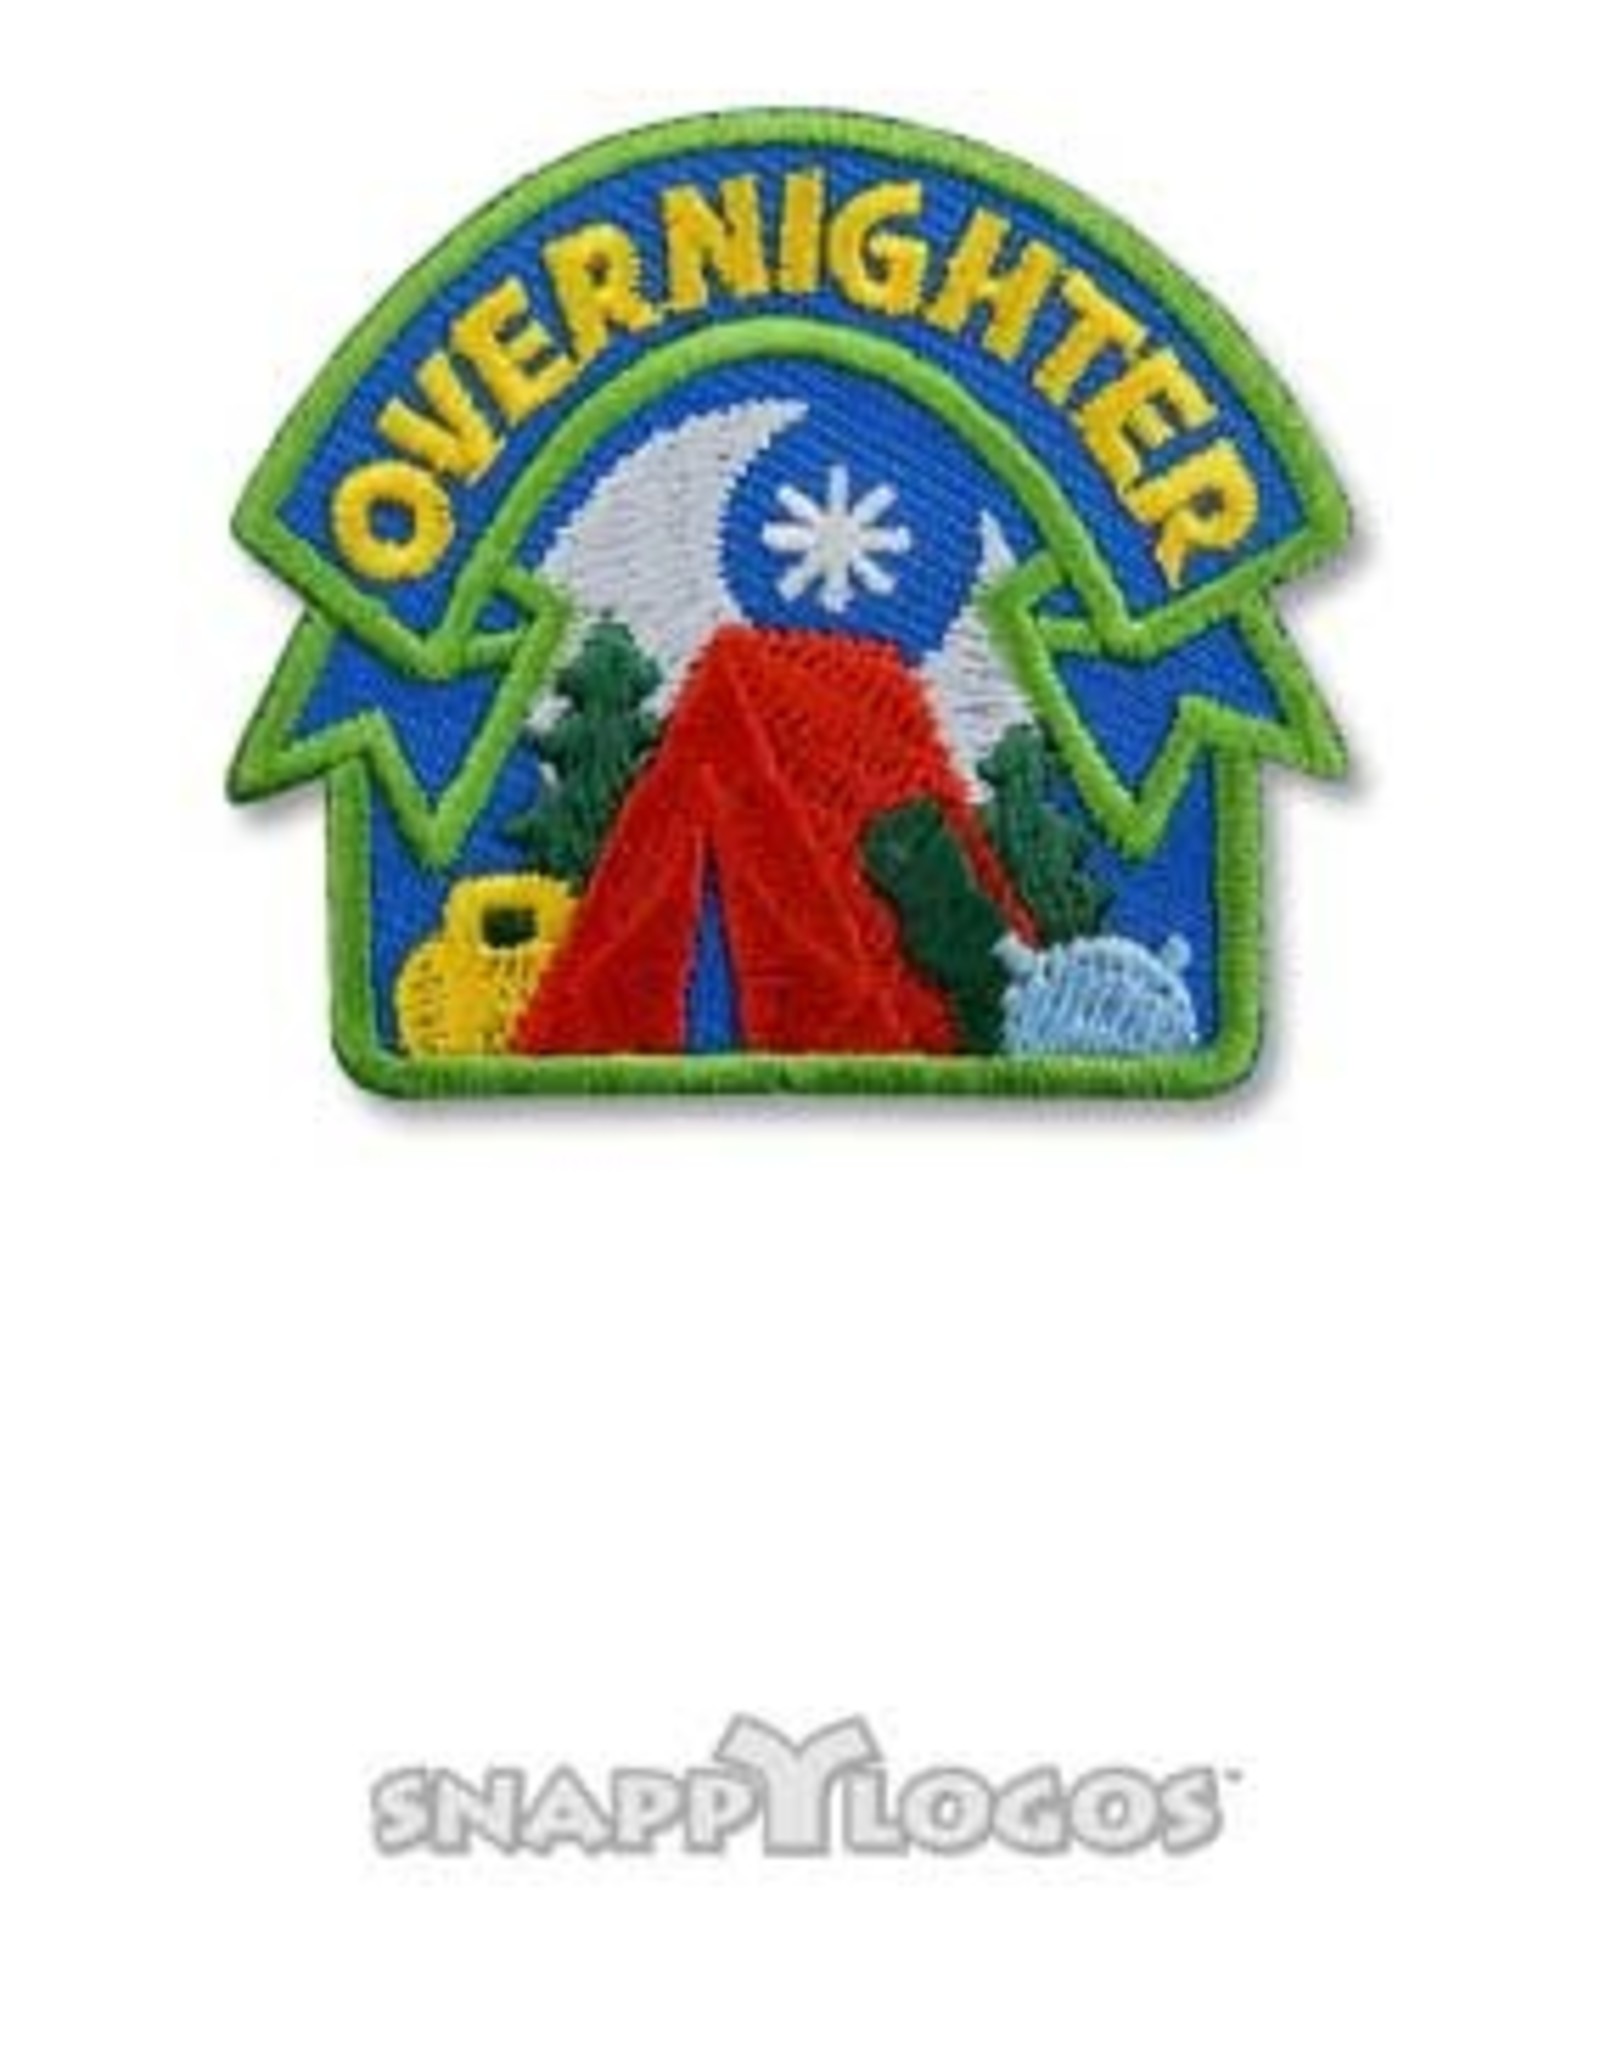 snappylogos Overnighter (Tent) Fun Patch